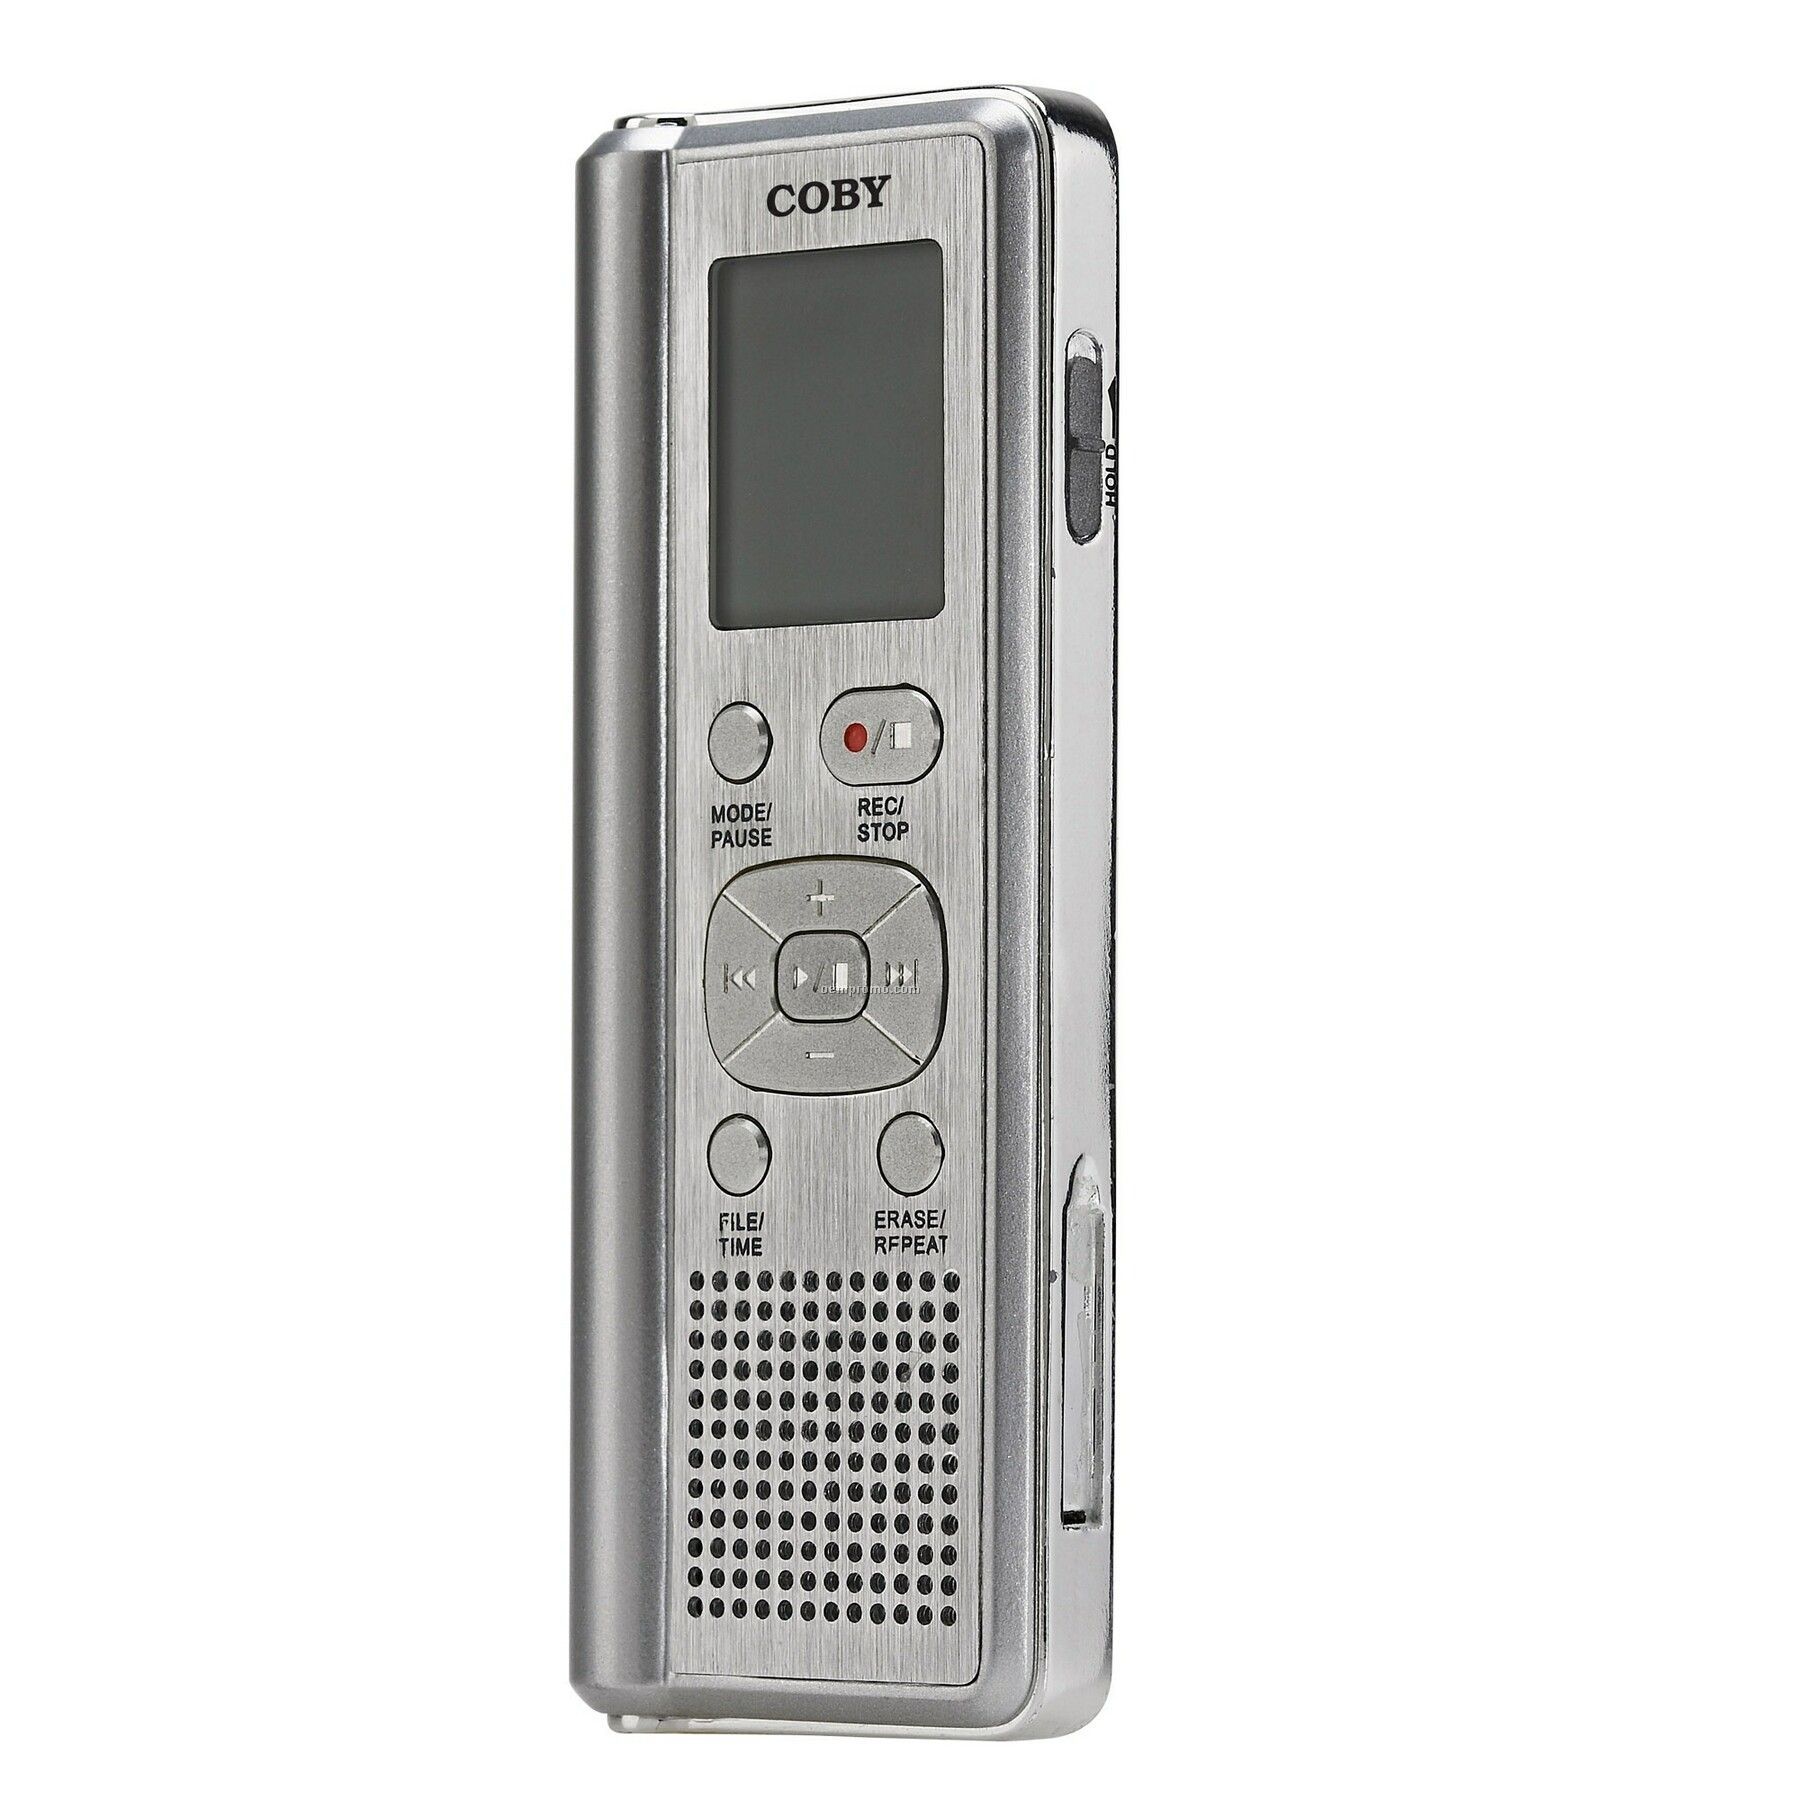 Coby Digital Voice Recorder W/ Integrated Speaker